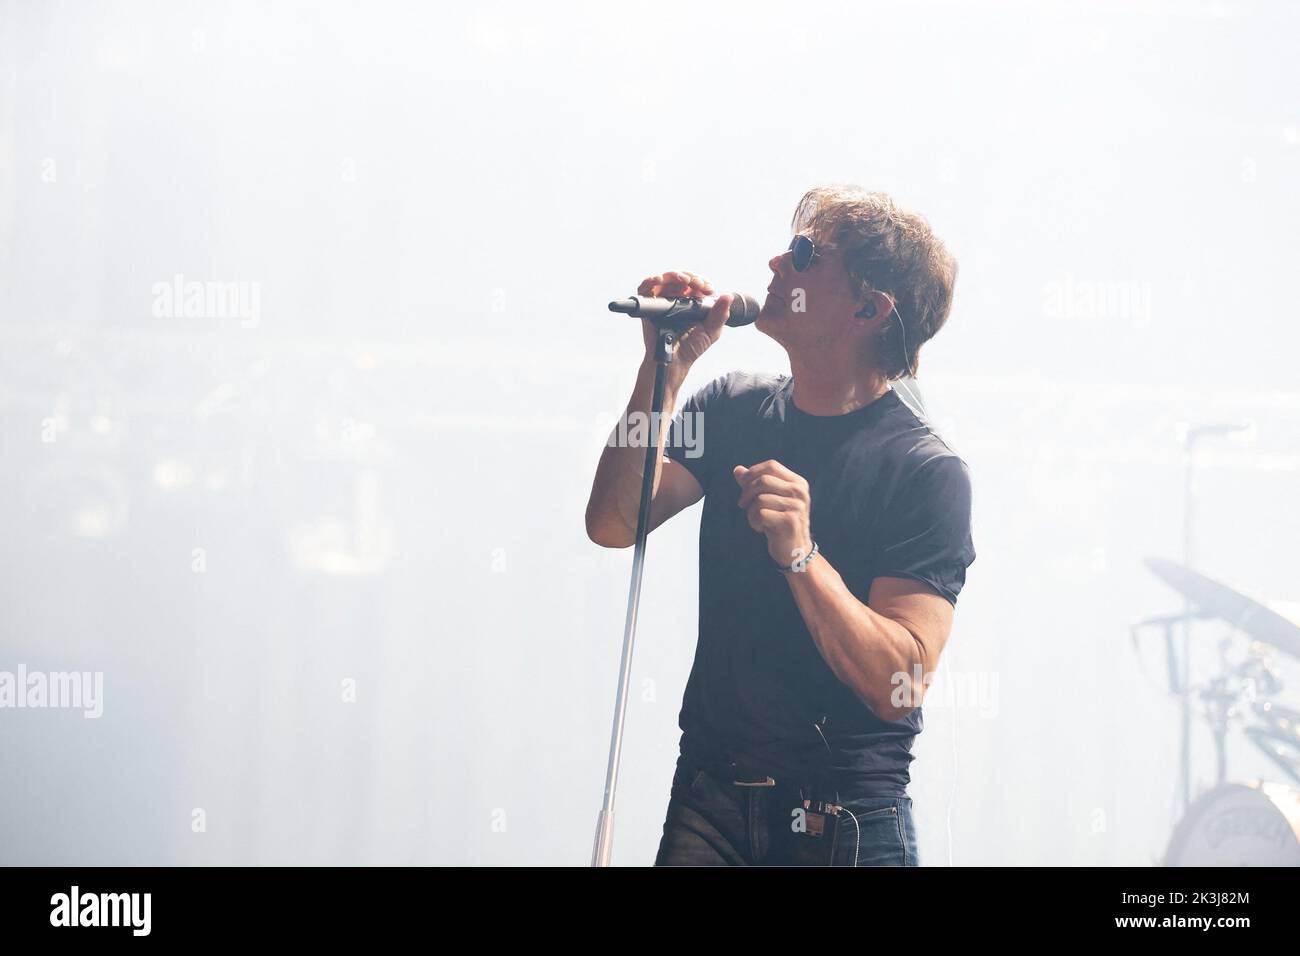 A-Ha perfoms at Montreux Jazz Festival, on July 01, 2022, in Montreux, Switzerland. Photo by Loona/ABACAPRESS.COM Stock Photo